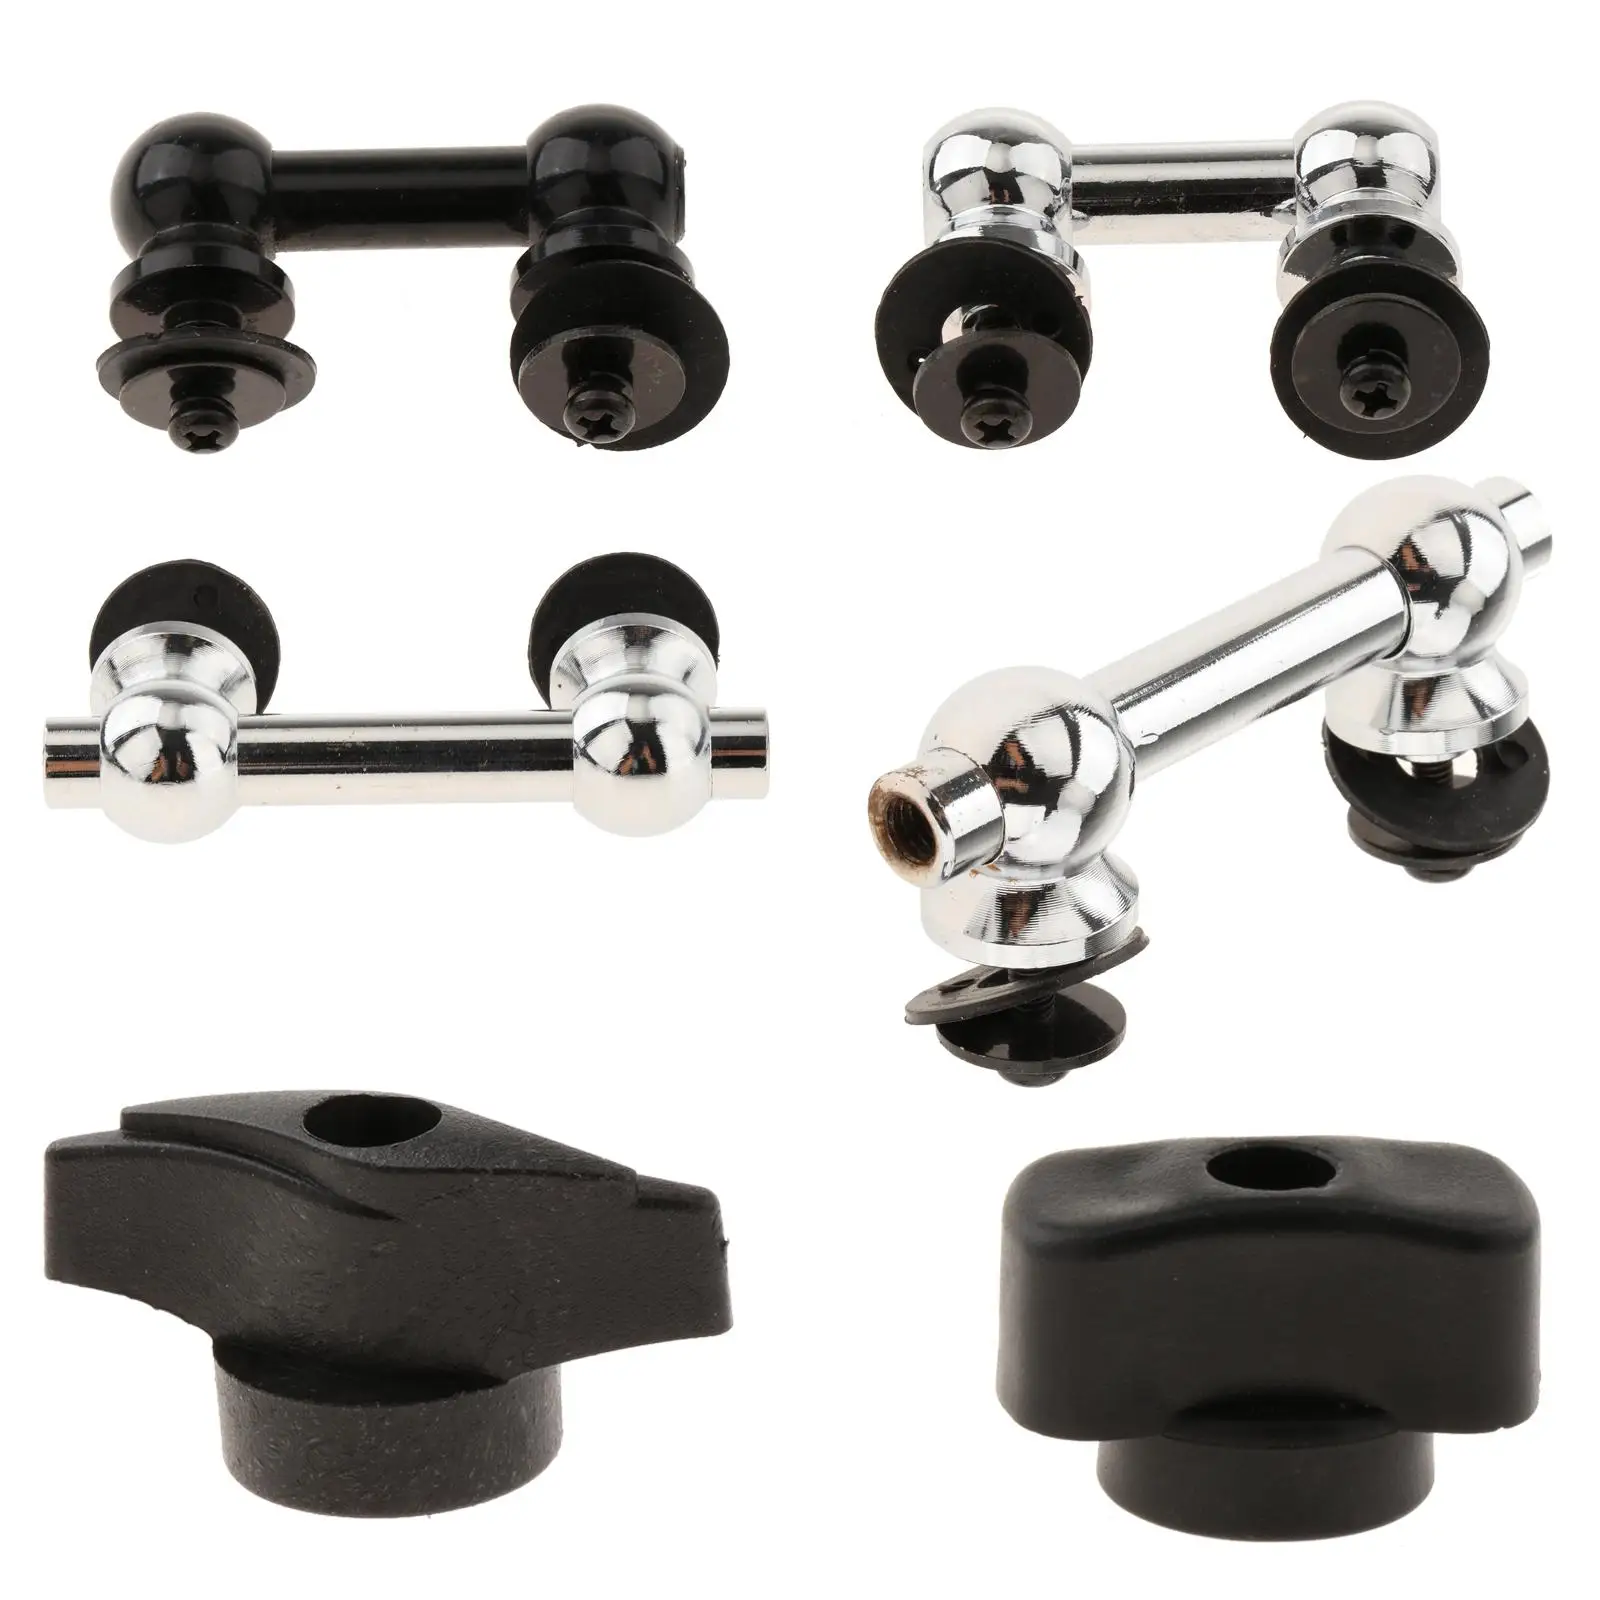 Multifunction Double End Drum Lugs Two Side Drum Lug Snare Drum Stand Drum Replacement Parts Percussion Instruments Parts